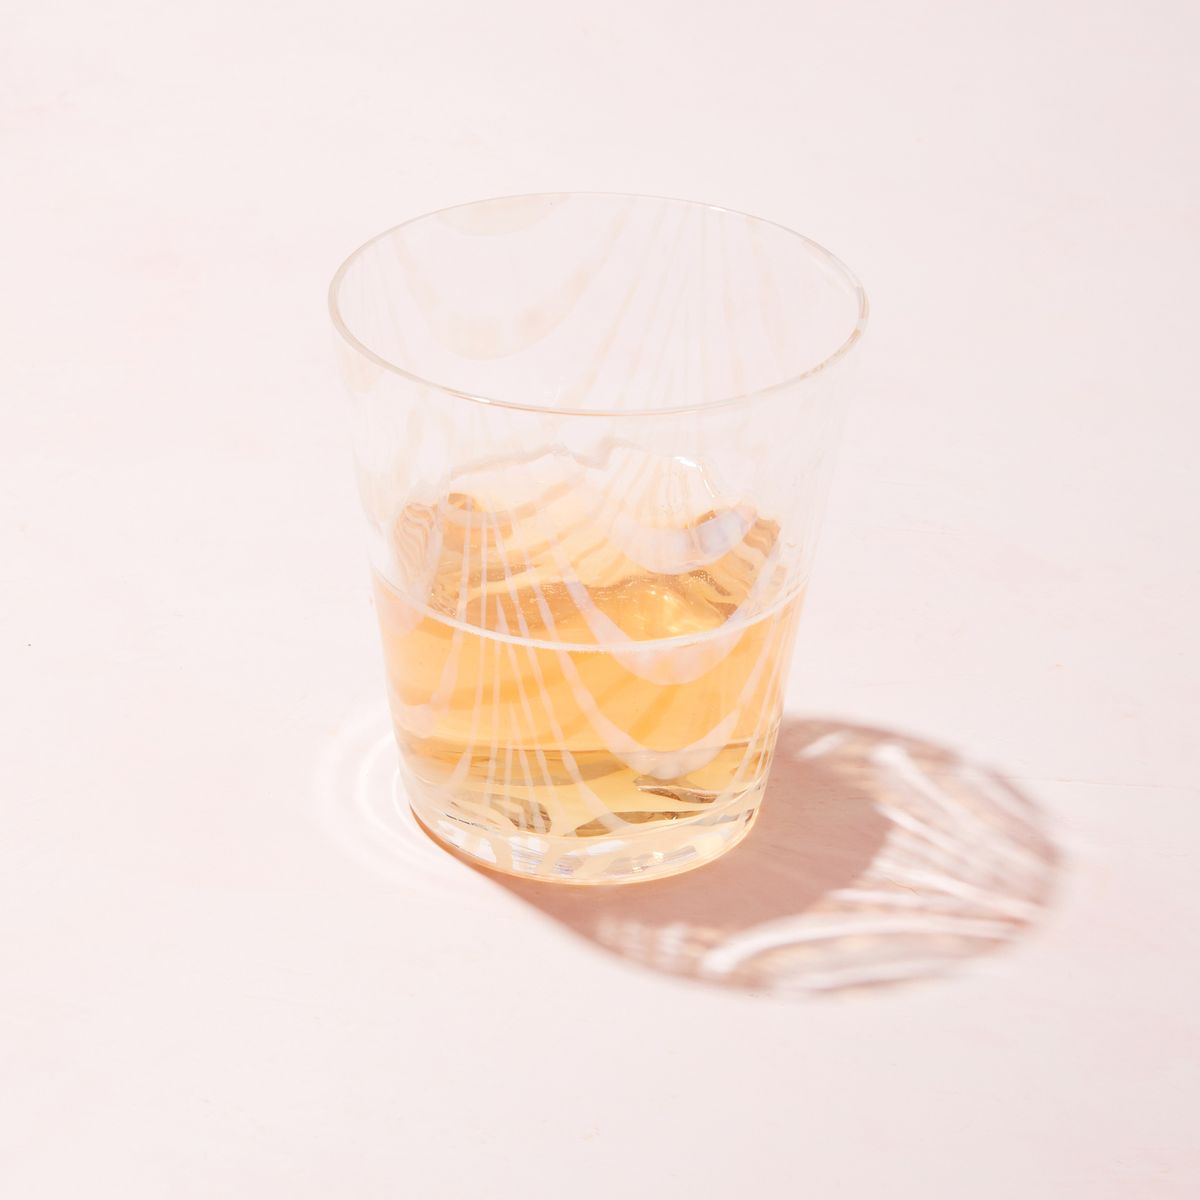 A short clear glass with a delicate ripple pattern, half filled with a drink and casting a shadow